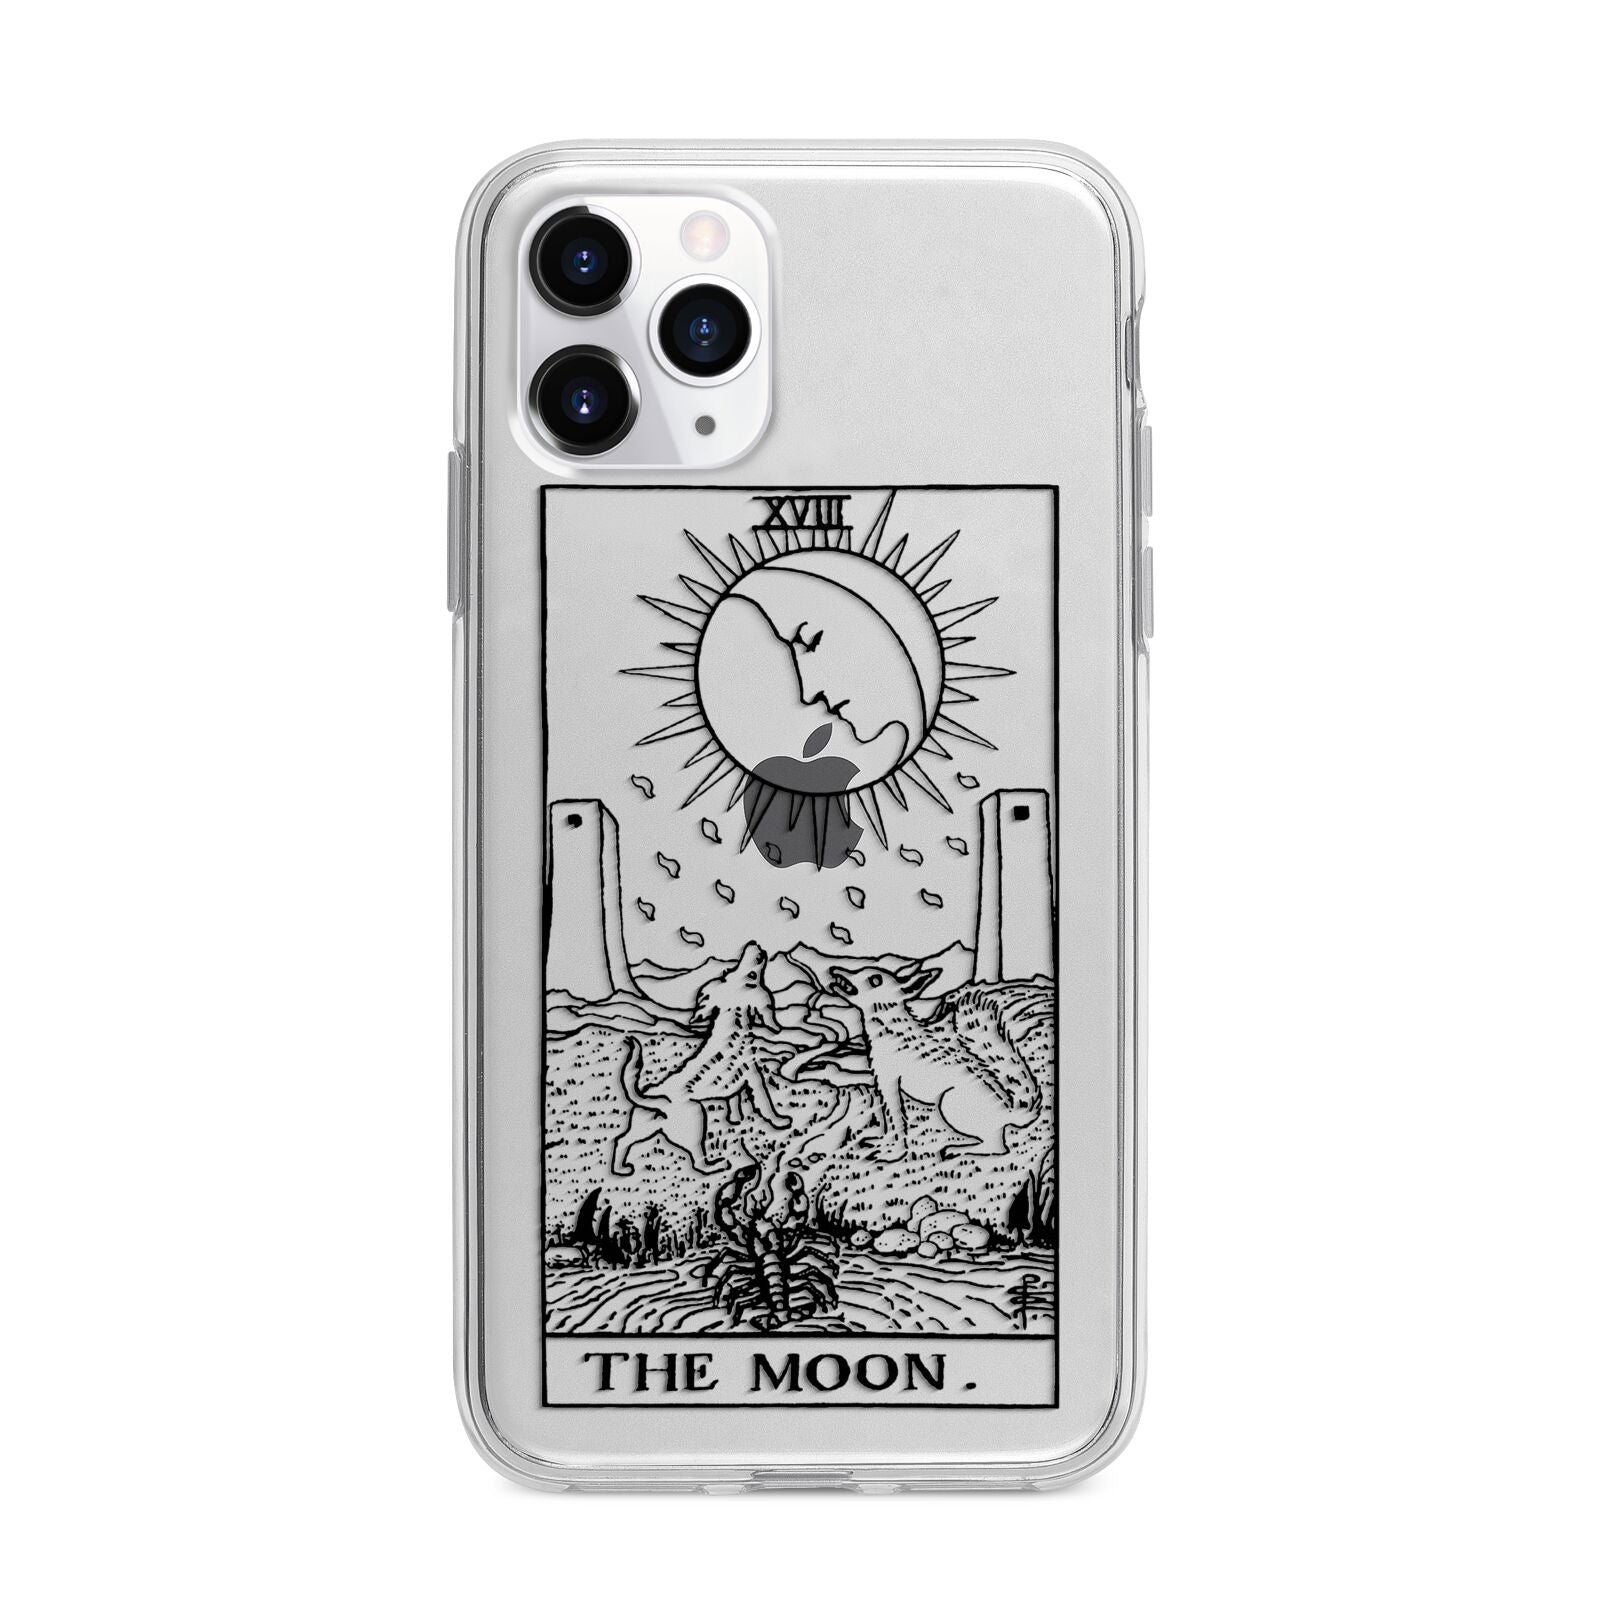 The Moon Monochrome Apple iPhone 11 Pro Max in Silver with Bumper Case